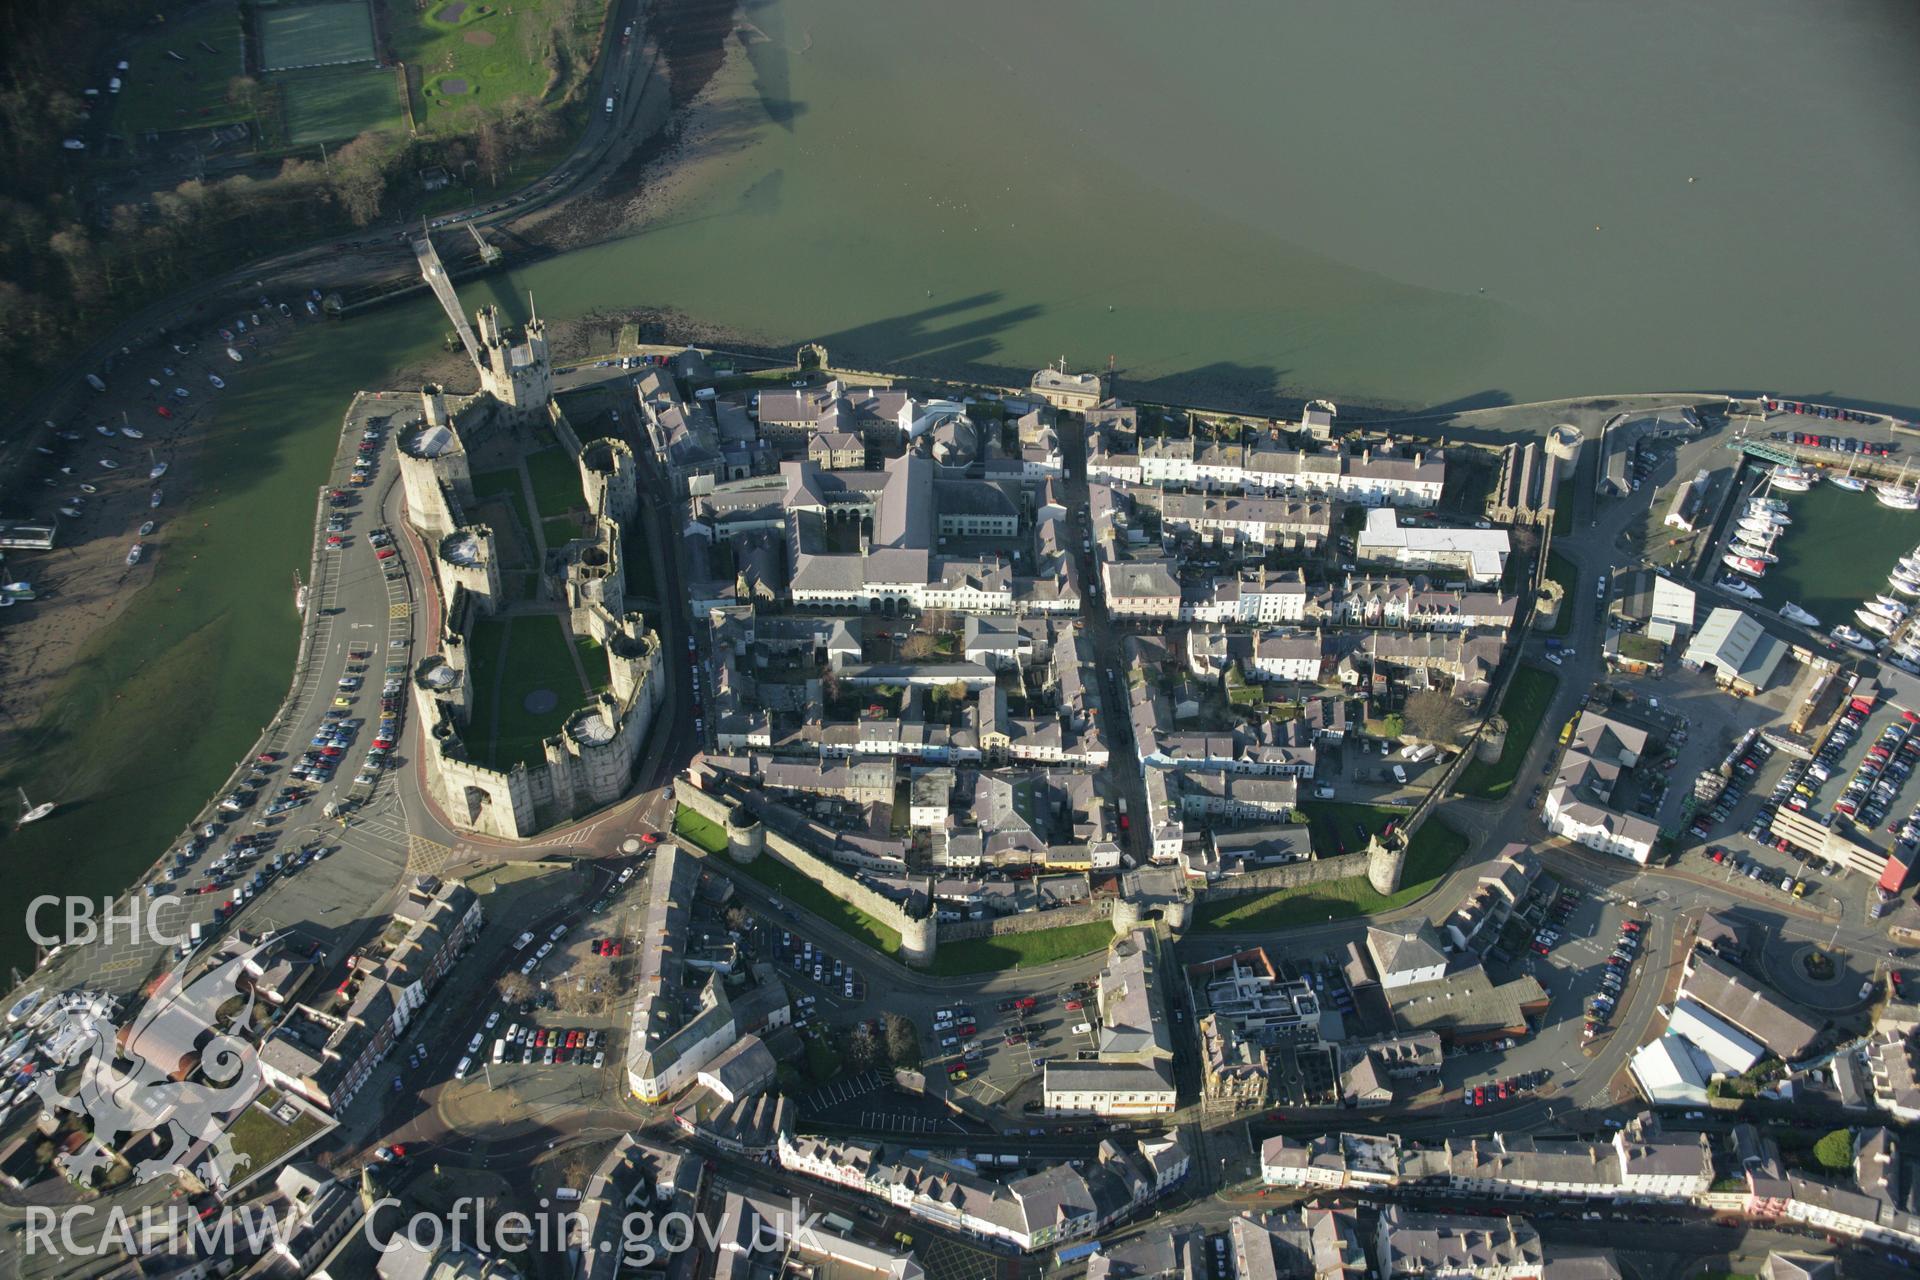 RCAHMW colour oblique aerial photograph of Caernarfon. A landscape view. Taken on 25 January 2007 by Toby Driver